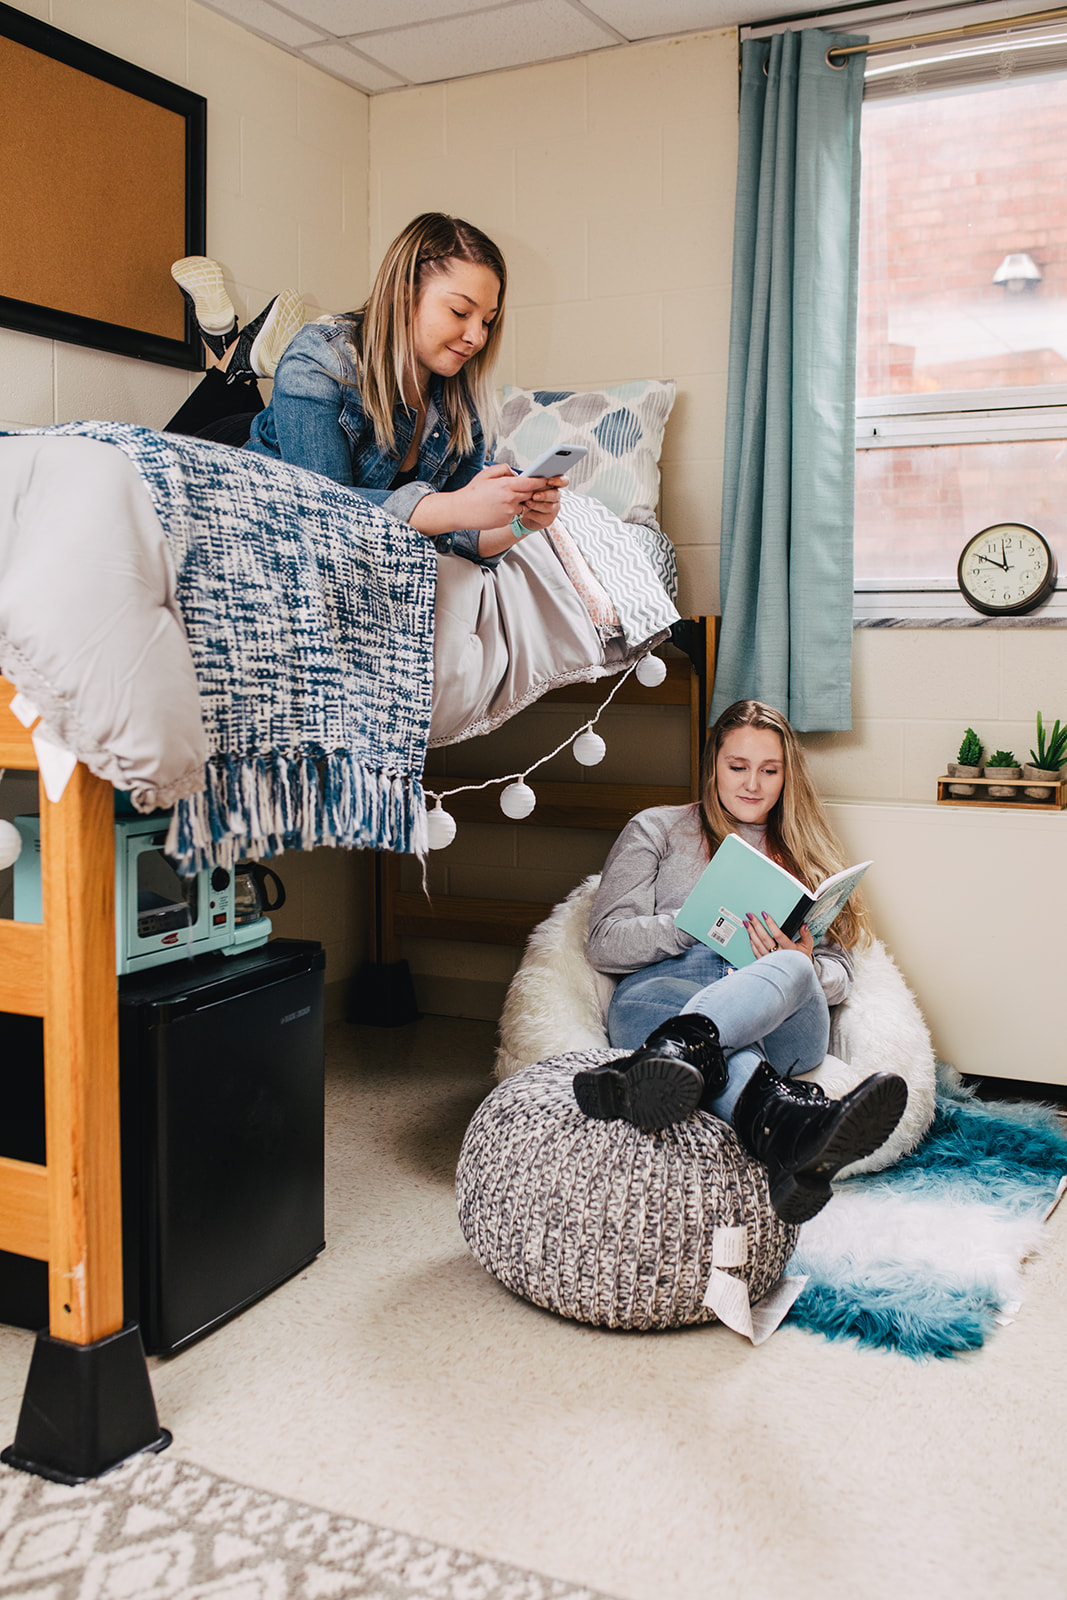 Students hanging out in dorm room